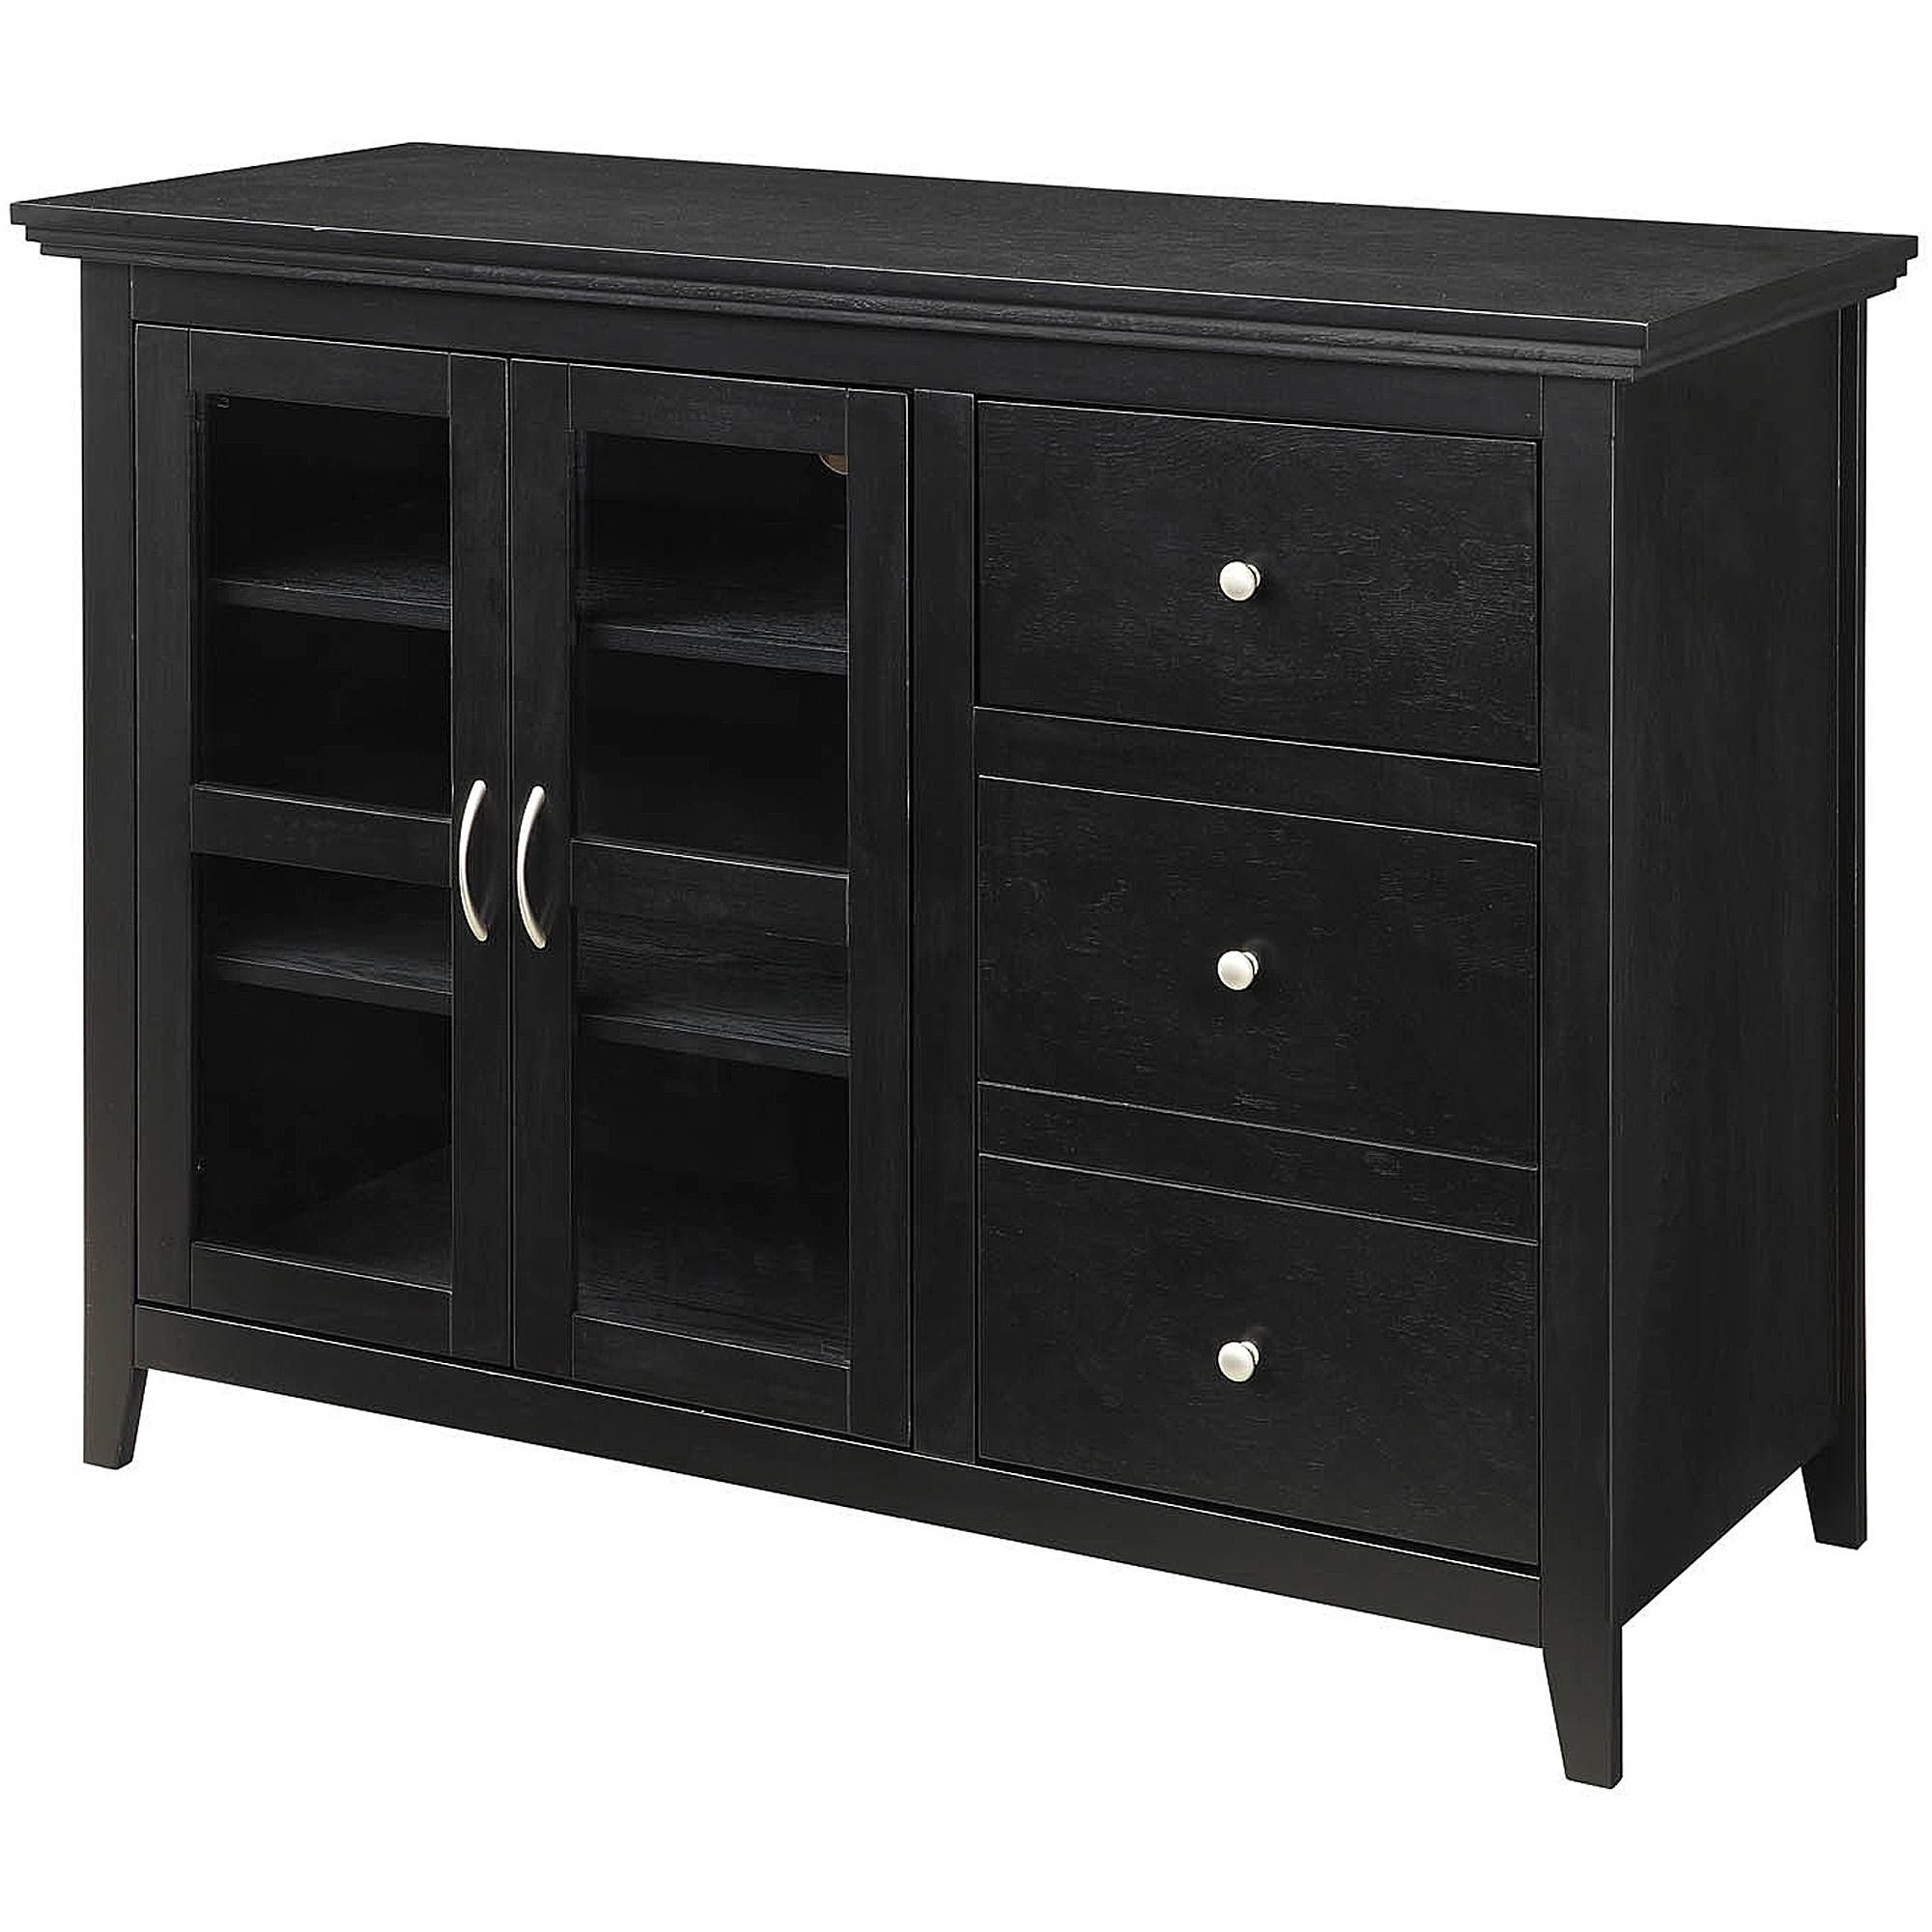 Convenience Concepts Sierra Highboy Tv Stand For Tvs Up To 50 For Black Wood Sideboard (View 16 of 20)